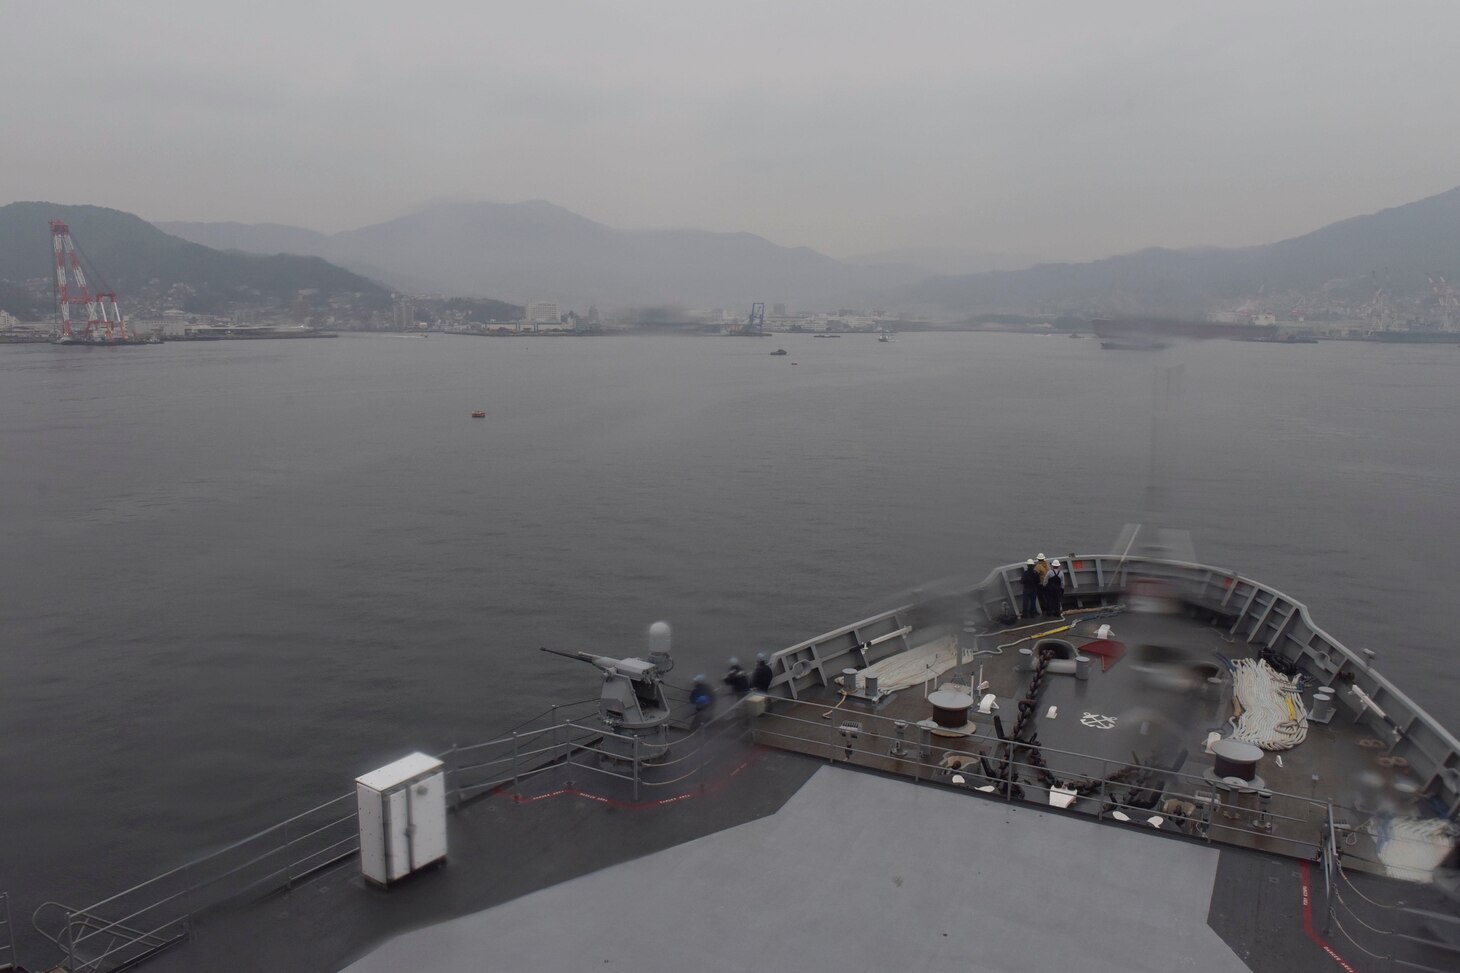 KURE, Japan (Jan. 22, 2020) - The submarine tender USS Emory S. Land (AS 39), prepares to moor in Kure, Japan, Jan. 22, for a scheduled port visit. Land is deployed to the U.S. 7th Fleet area of operations to support theater security cooperation efforts in the Asia-Pacific region.